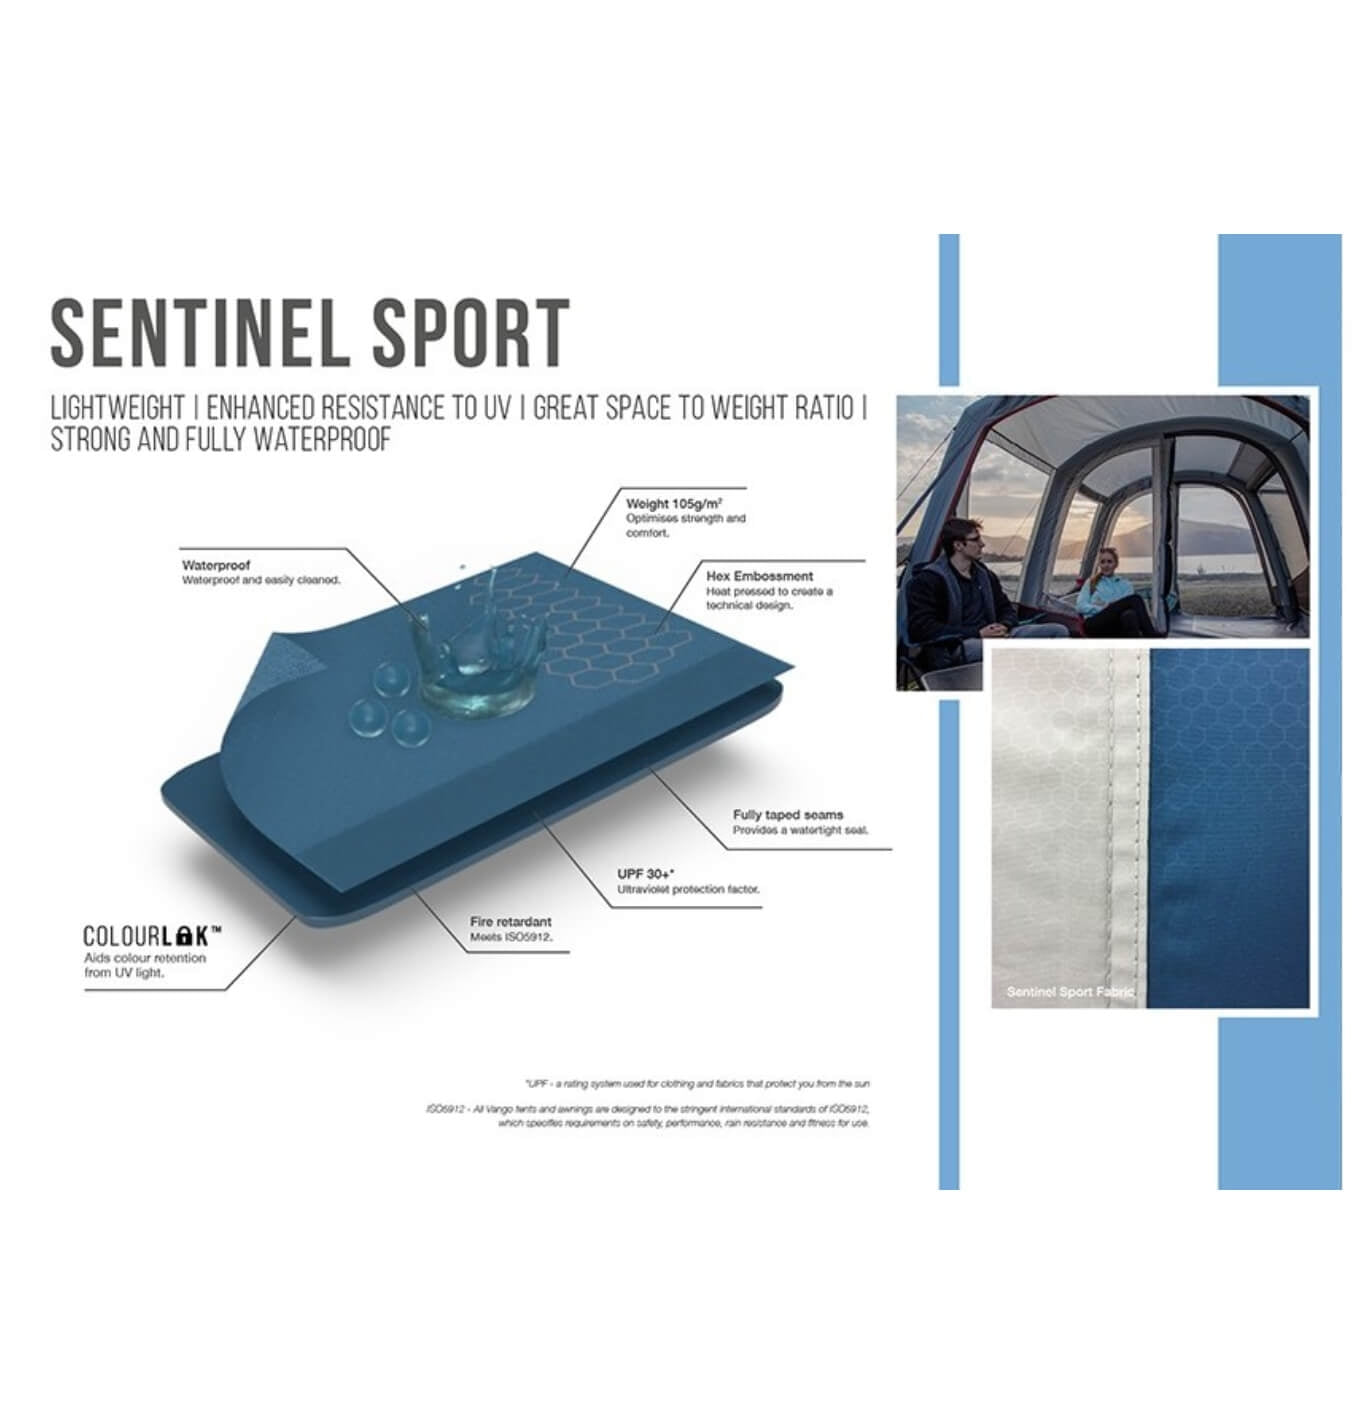 Sentinel Fabric features